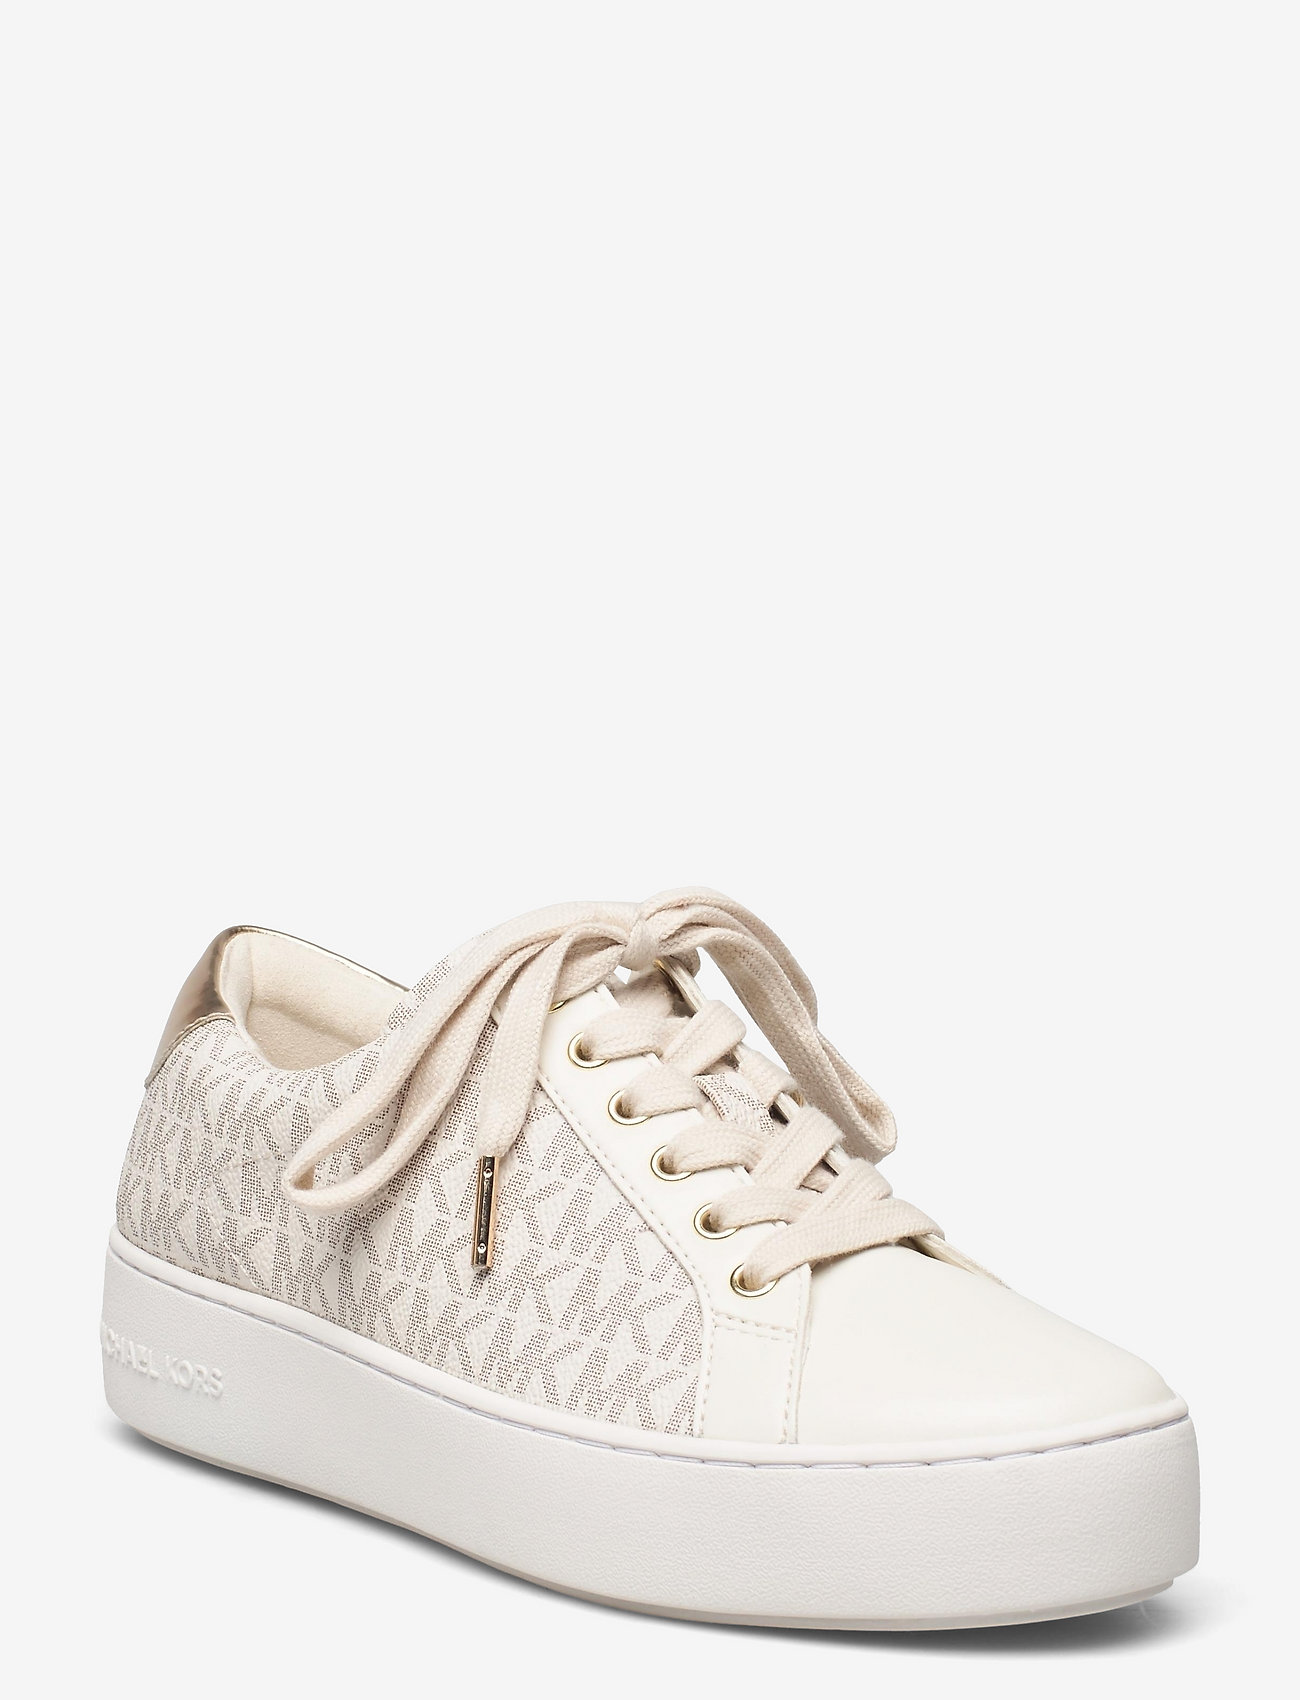 Michael Kors Poppy Lace Up - Low top sneakers | Boozt.com